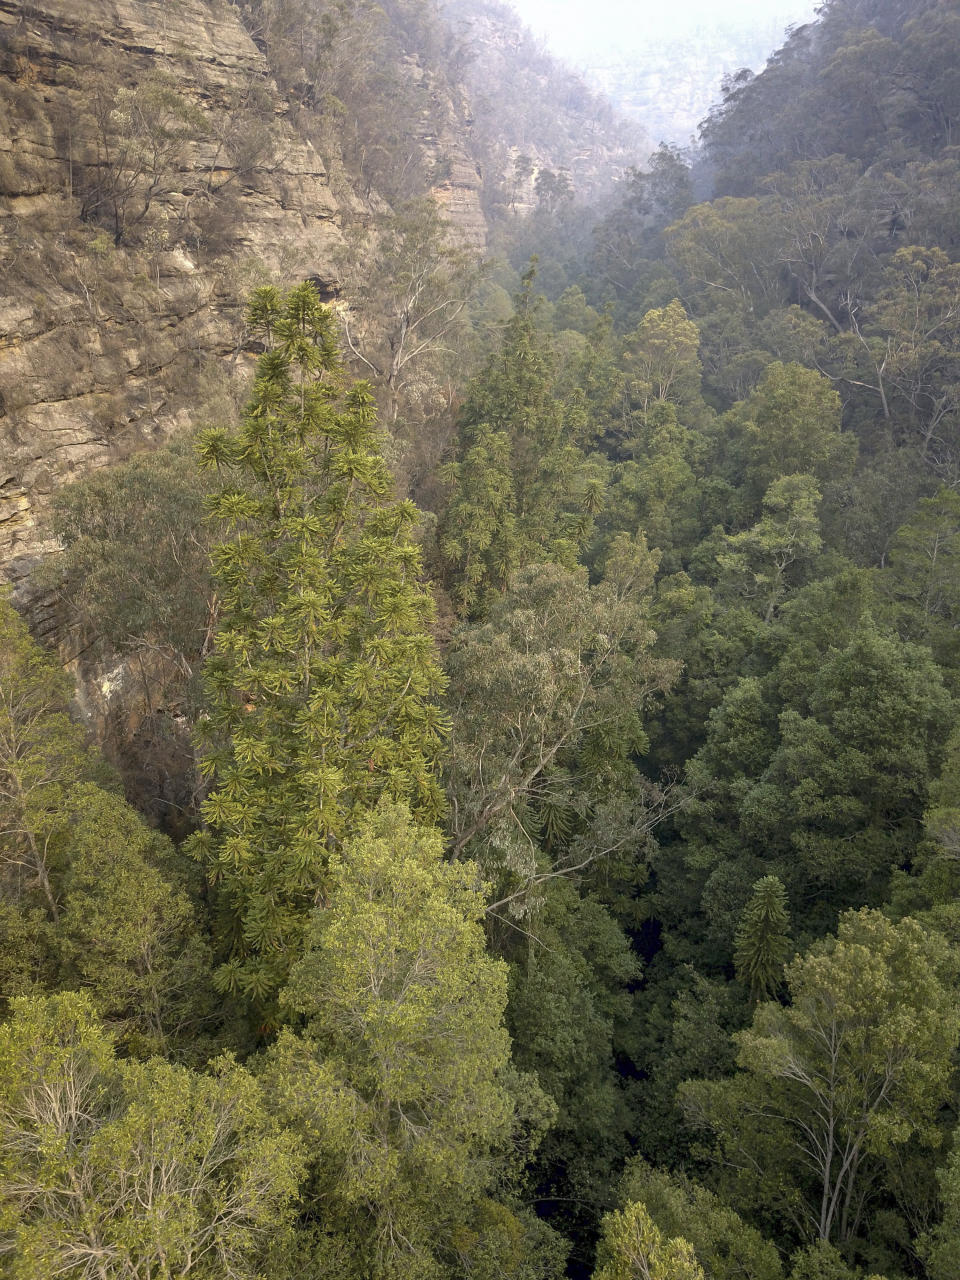 In this photo taken early January, 2020, and provided on Jan. 16, 2020, by the NSW National Parks and Wildlife Service, Wollemi pines thrive in a canyon in the Wollemi National Park, New South Wales, Australia. Specialist firefighters have saved the world's last remaining wild stand of a prehistoric tree from wildfires that razed forests west of Sydney. (NSW National Parks and Wildfire Service via AP)